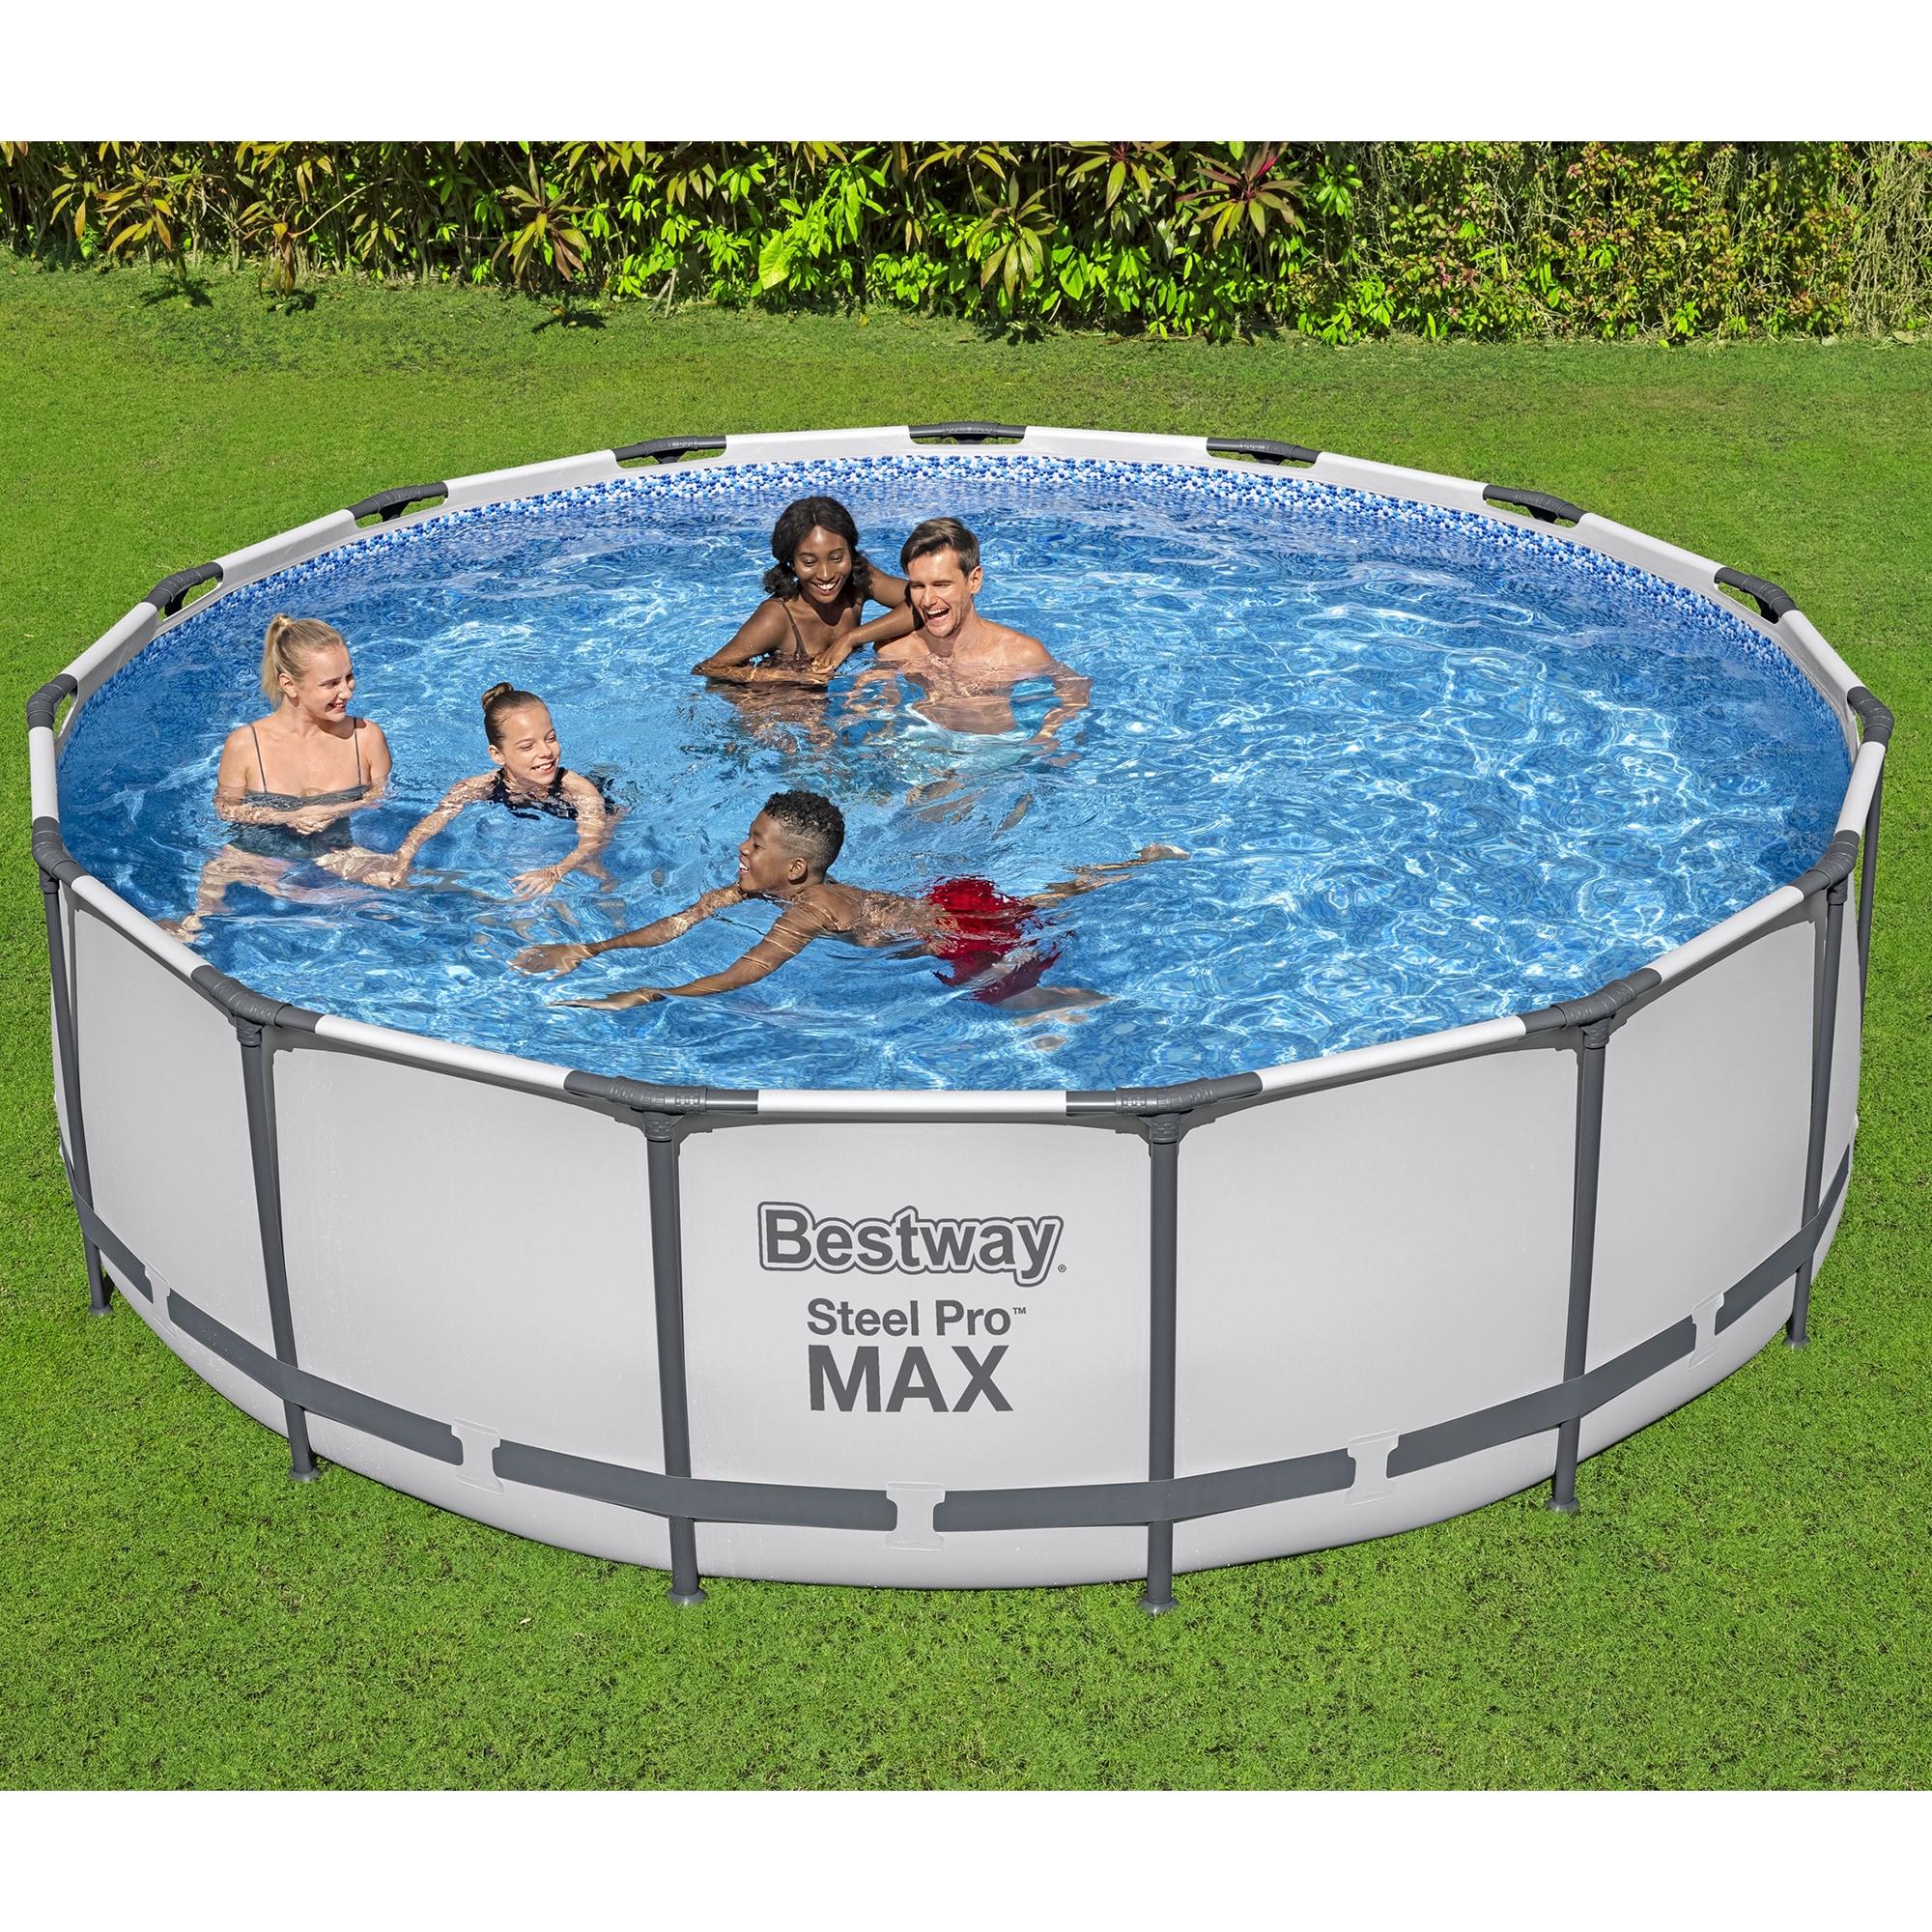 Steel Pro MAX 15' x 48" Prismatic Stone Above Ground Pool Set - image 5 of 6